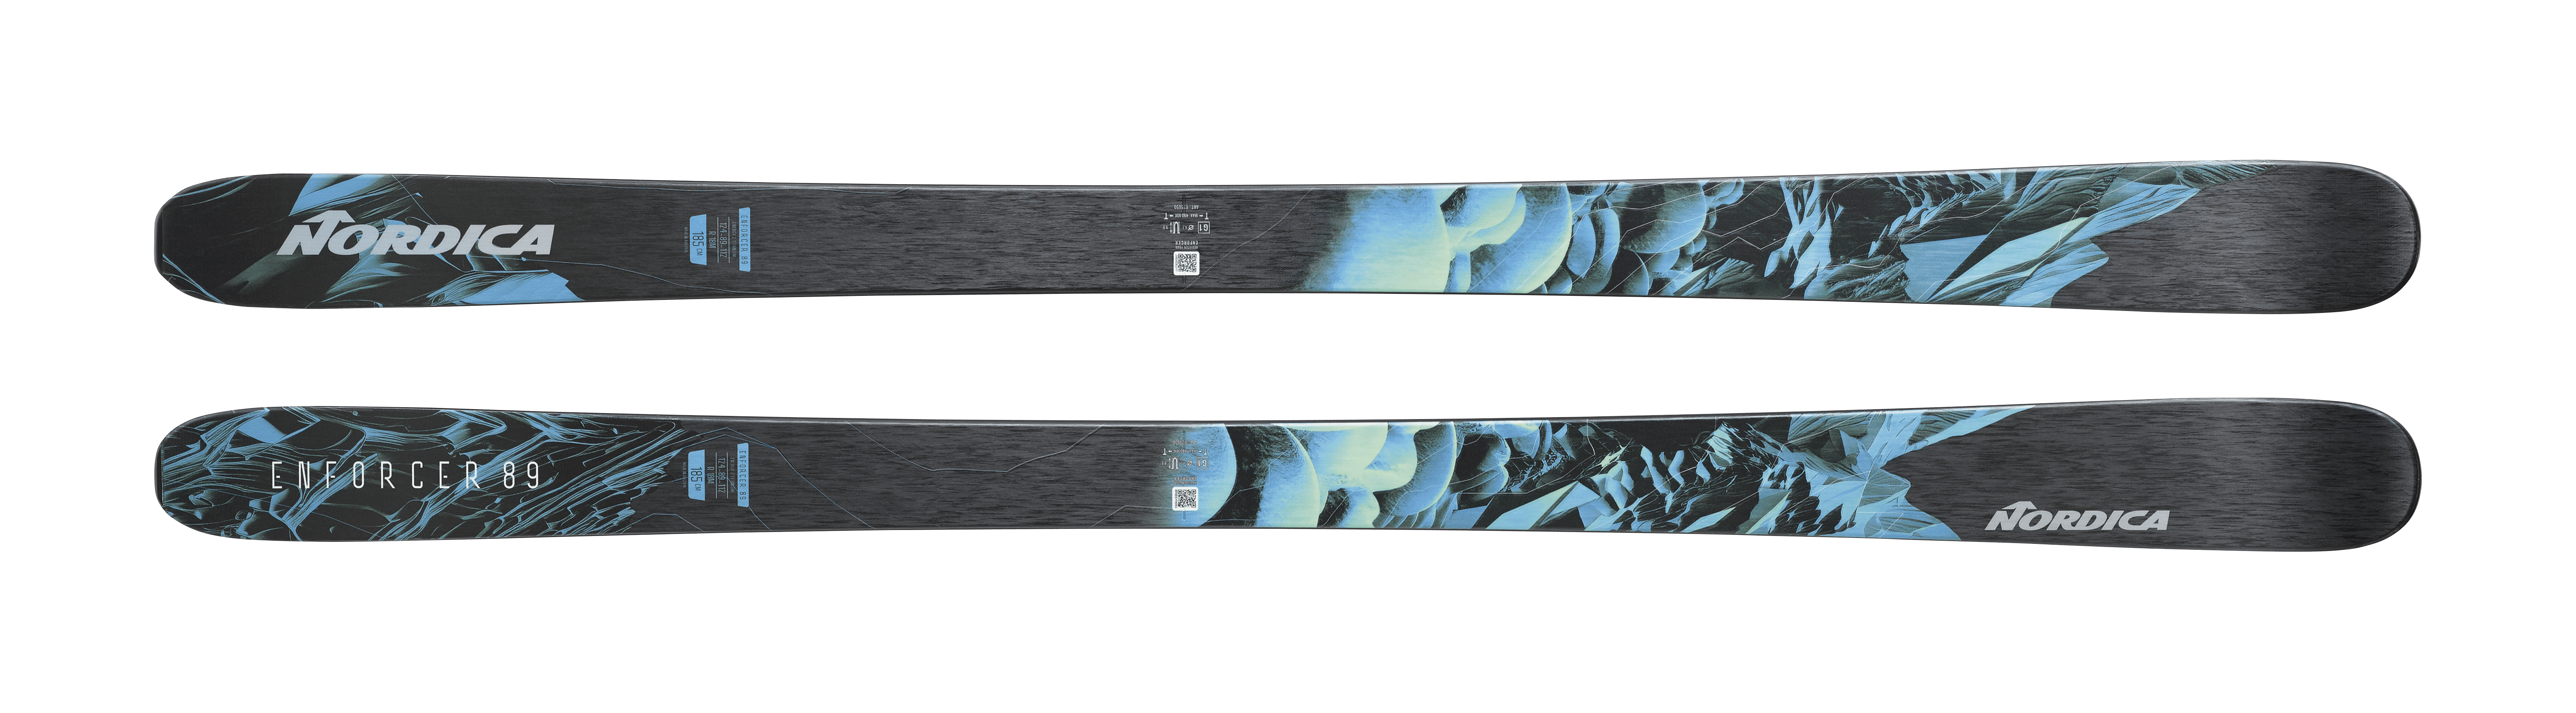 Picture of the Nordica Enforcer 89 skis.